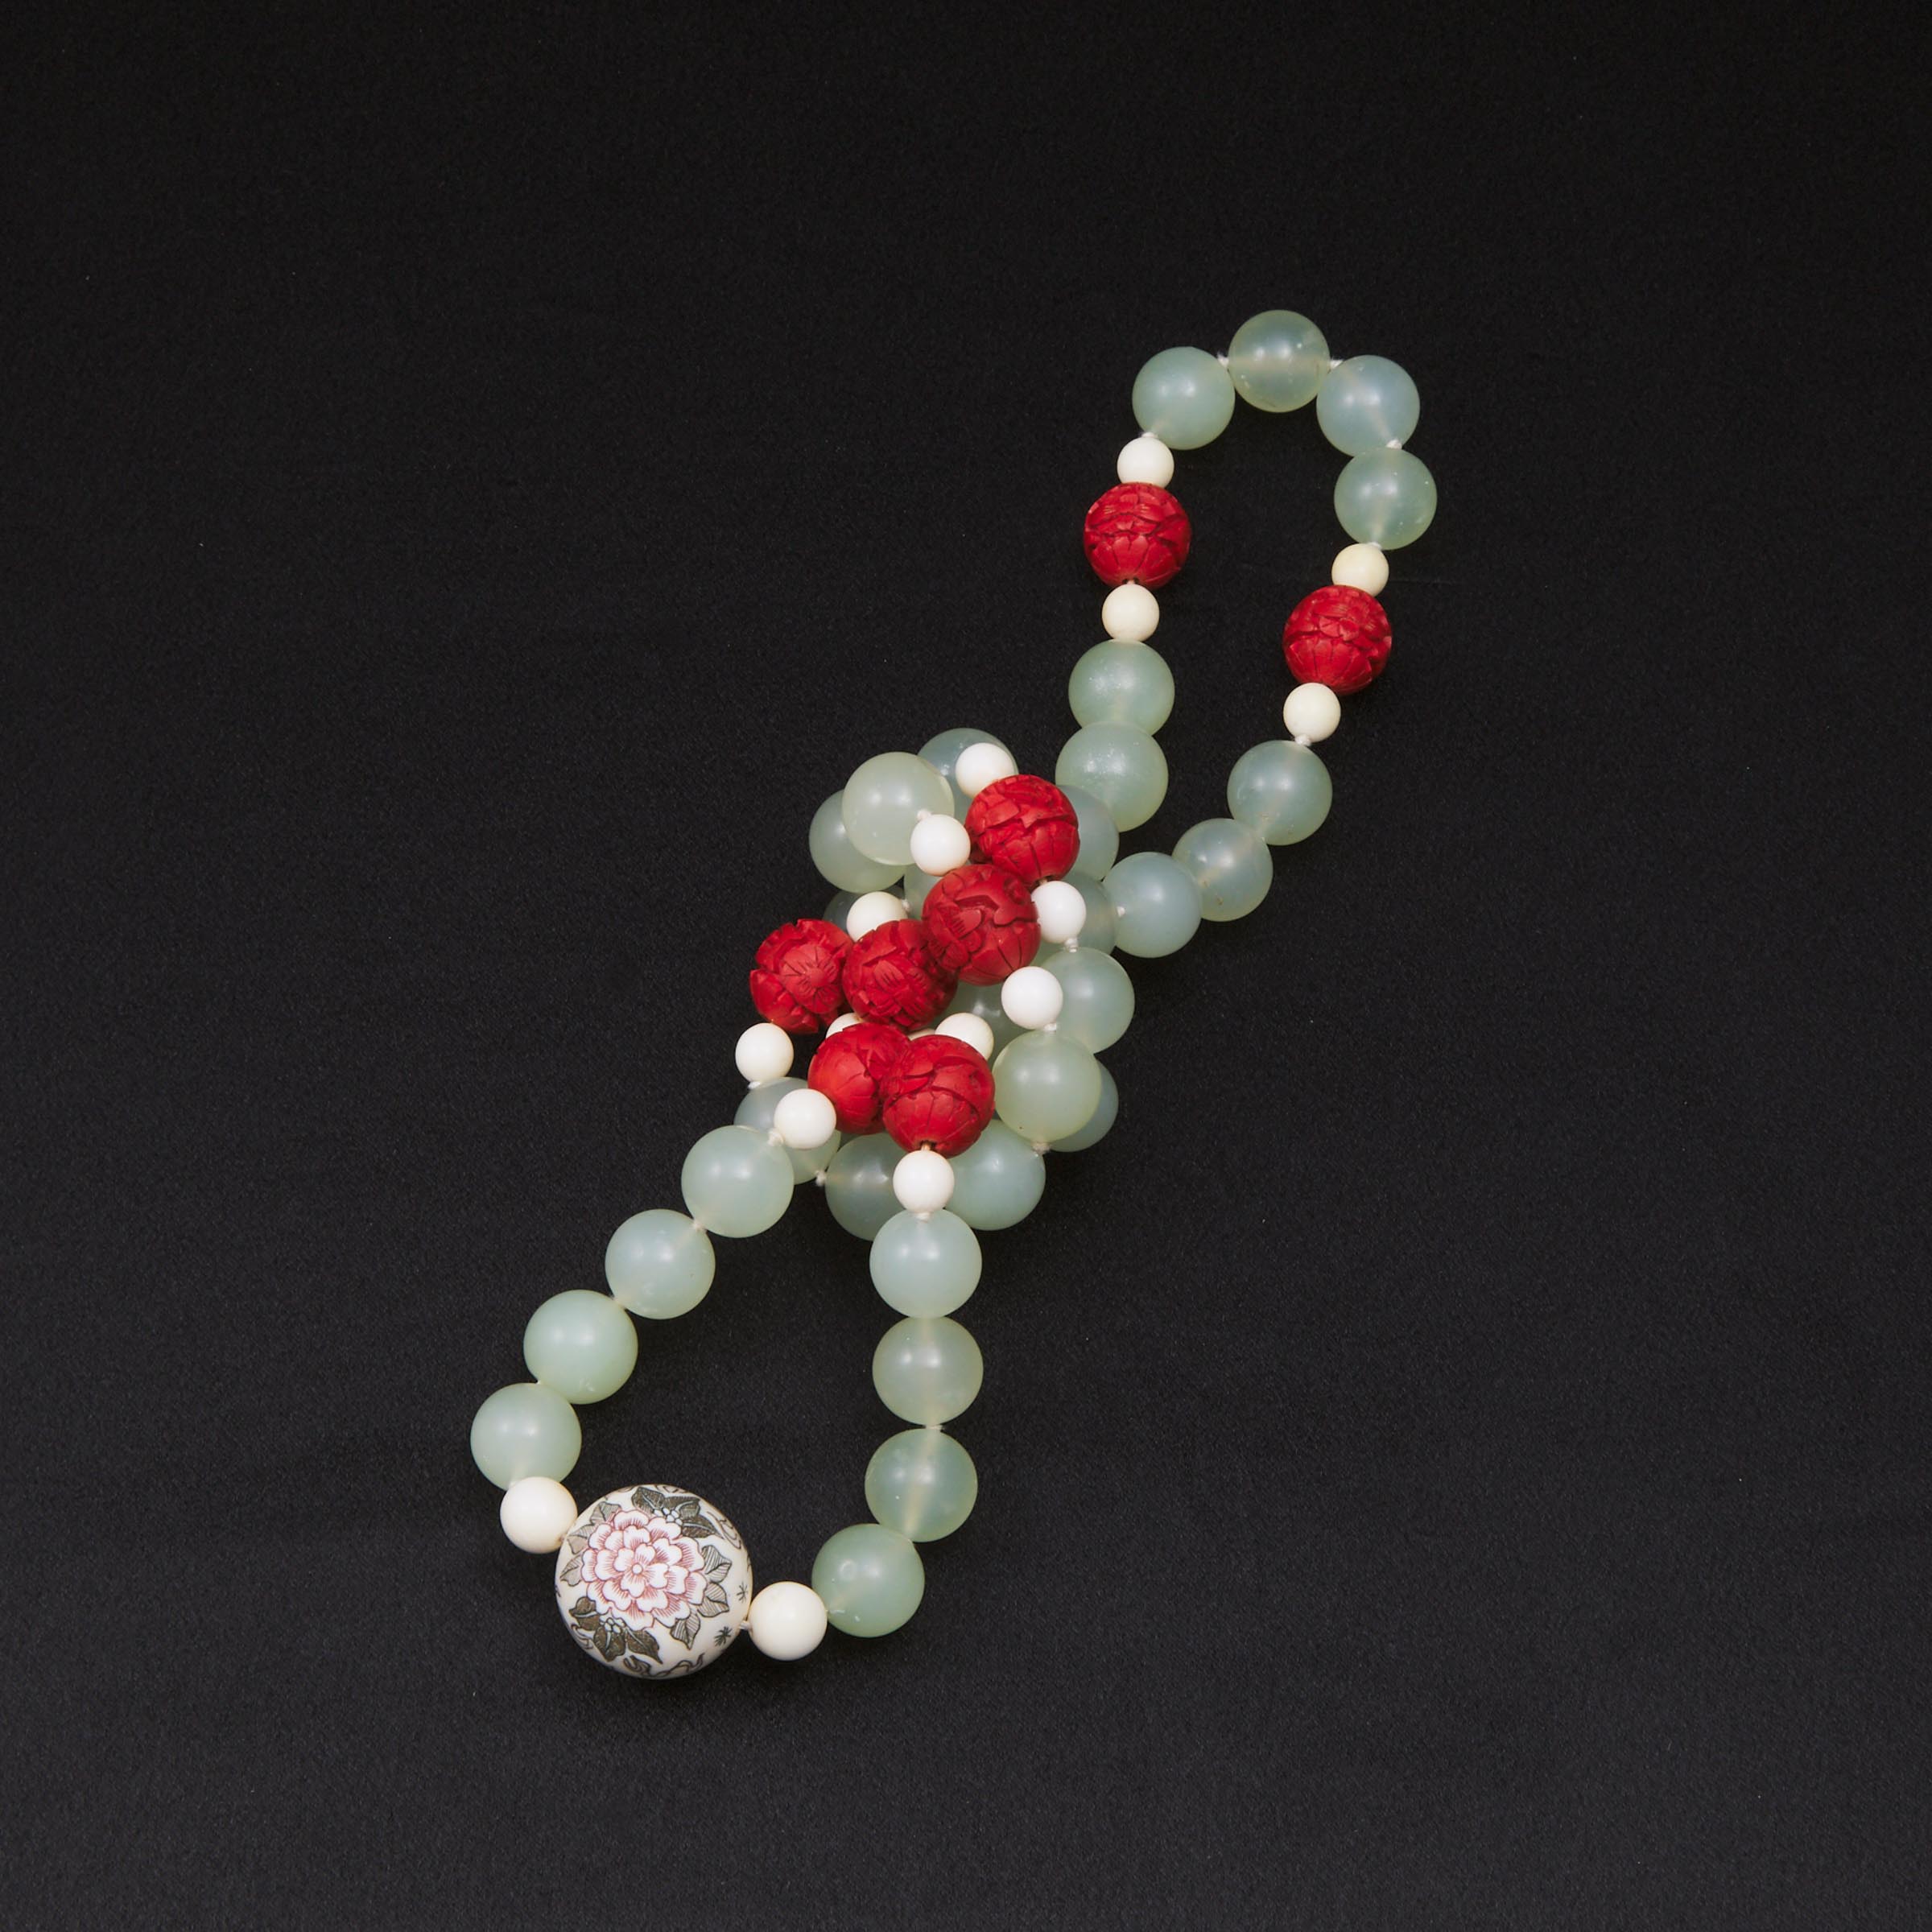 A Beaded Jade Necklace, Early 20th Century